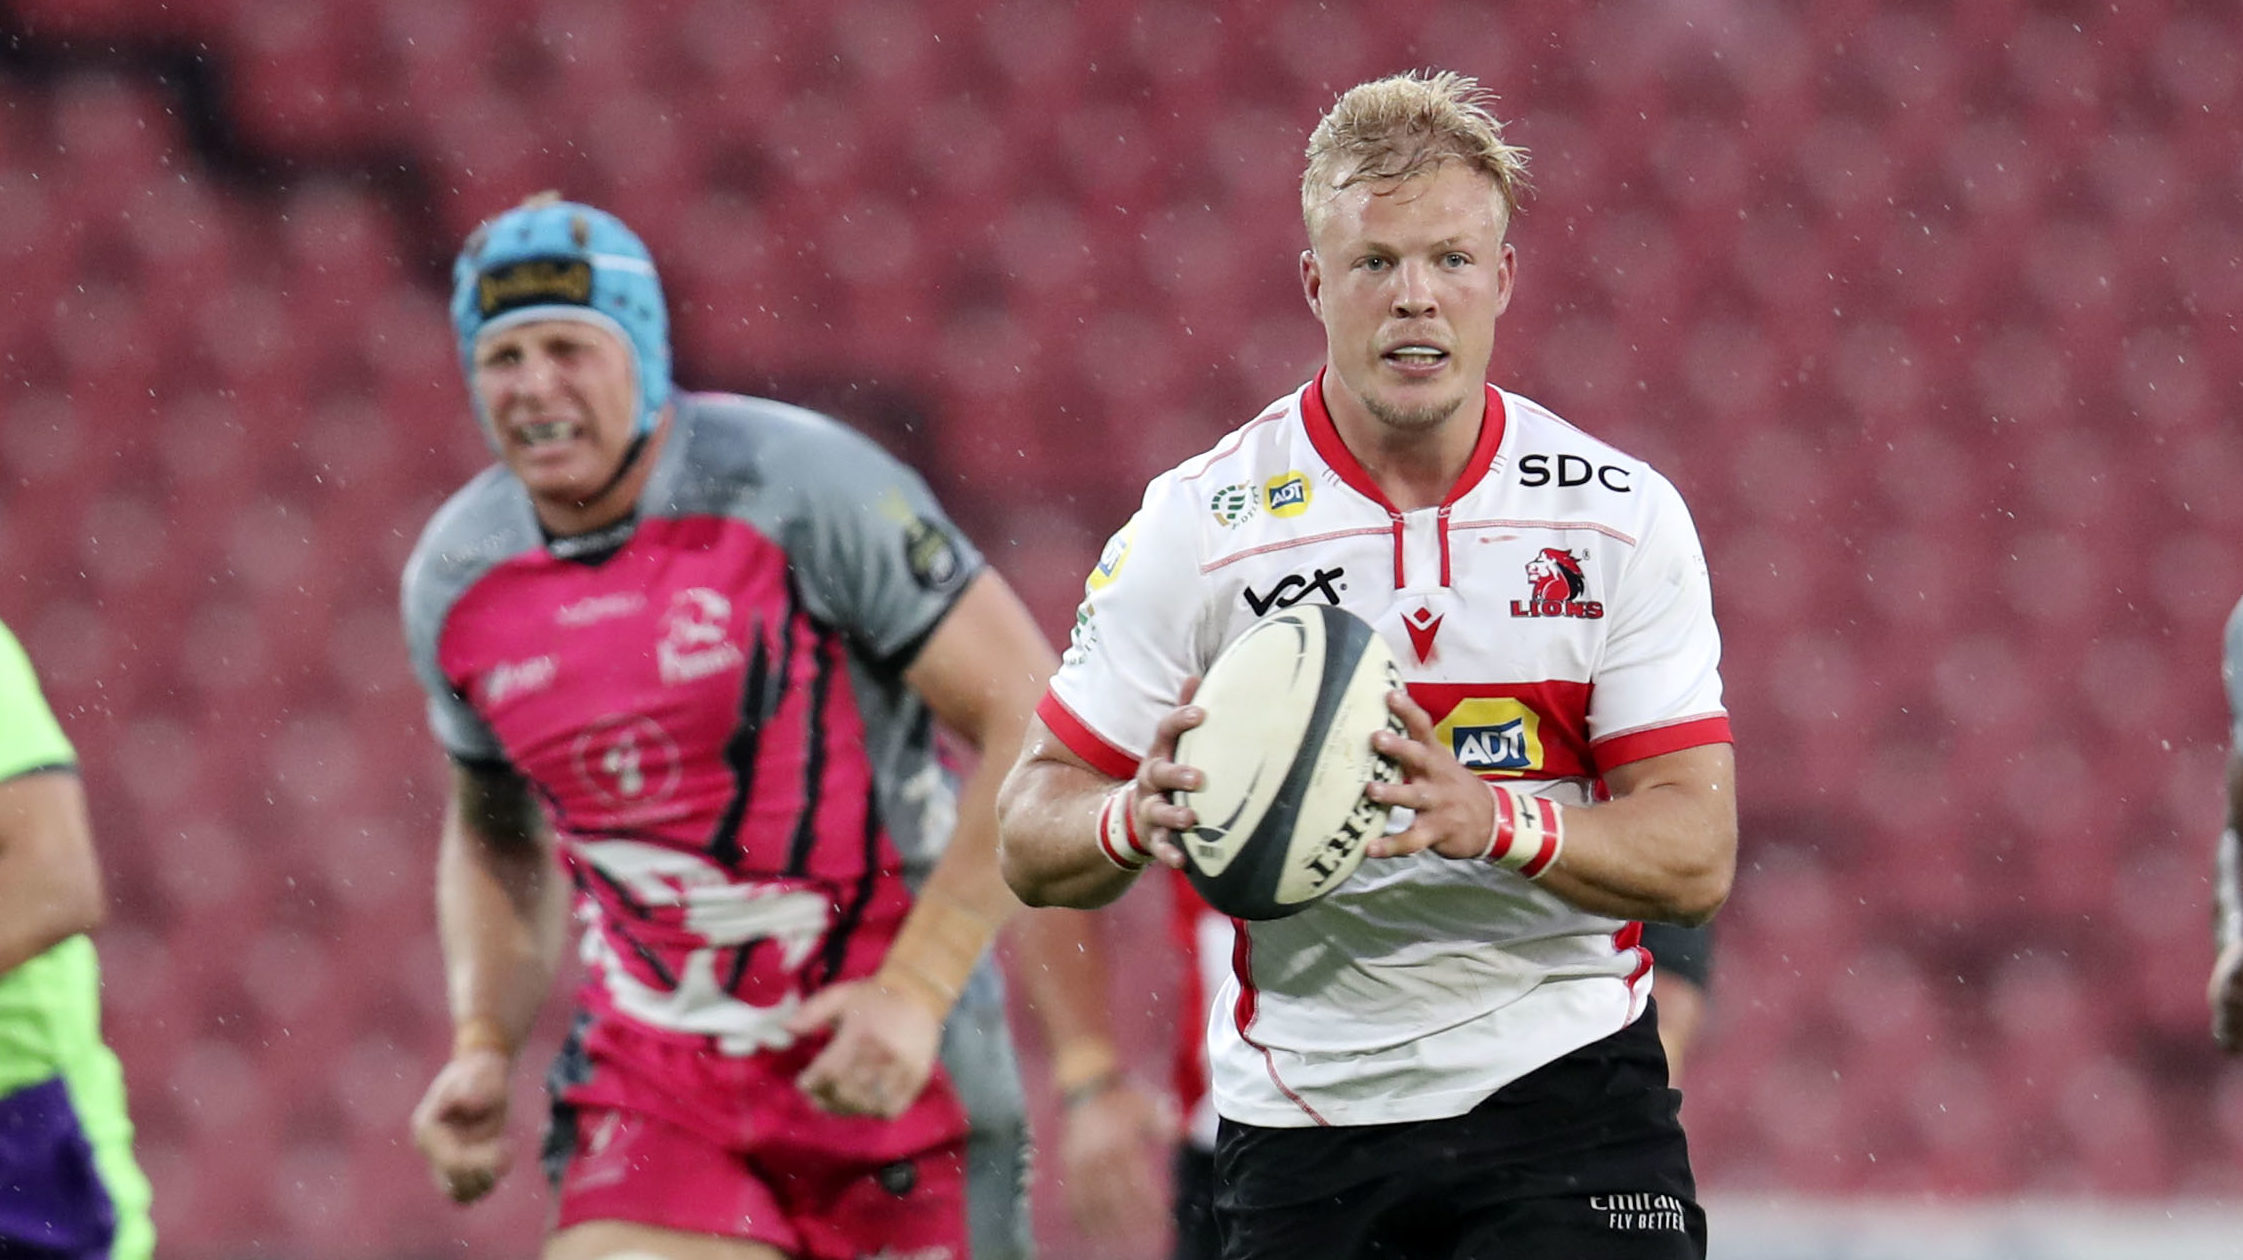 JC Pretorius of the Lions during the 2023 Currie Cup match between Lions and Pumas at the Ellis Park Stadium, Johannesburg on the 28 April 2023 ©Muzi Ntombela/BackpagePix